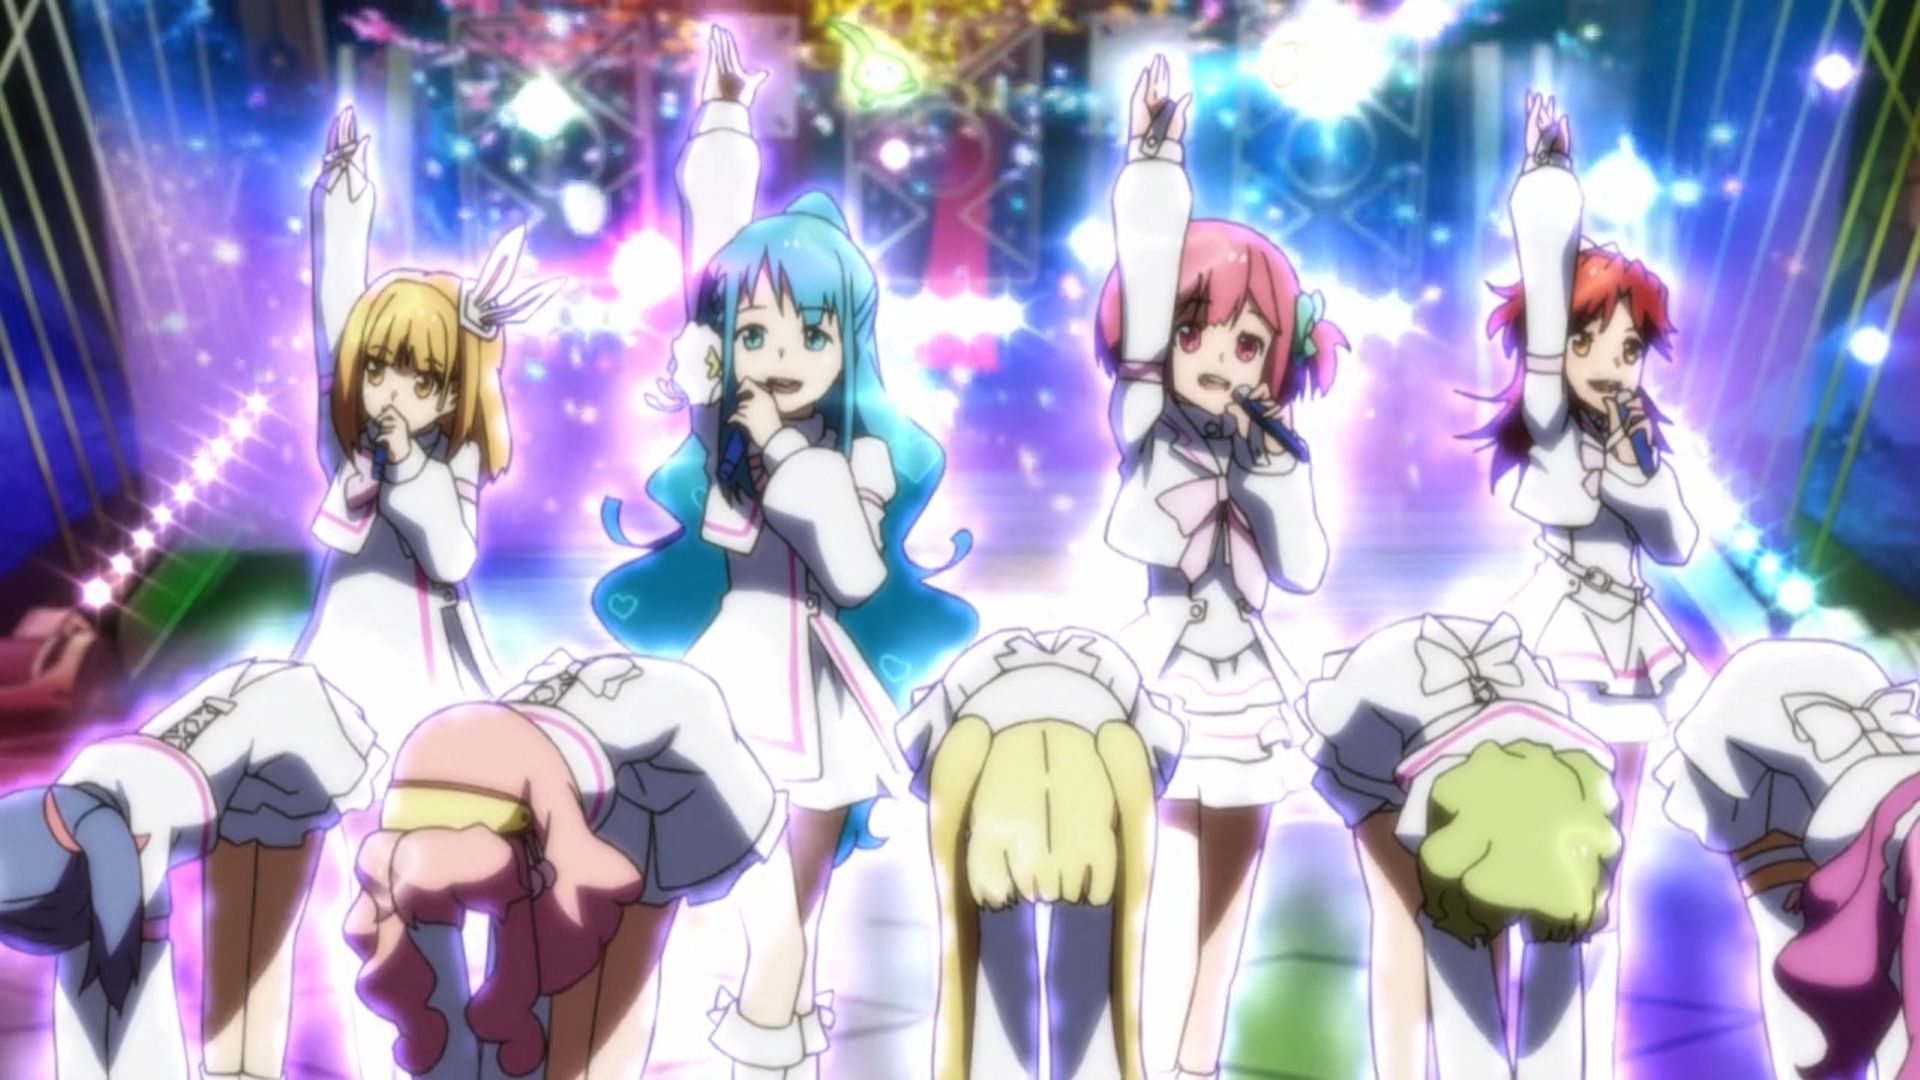 AKB0048 is one of the best anime series with girl idols. 